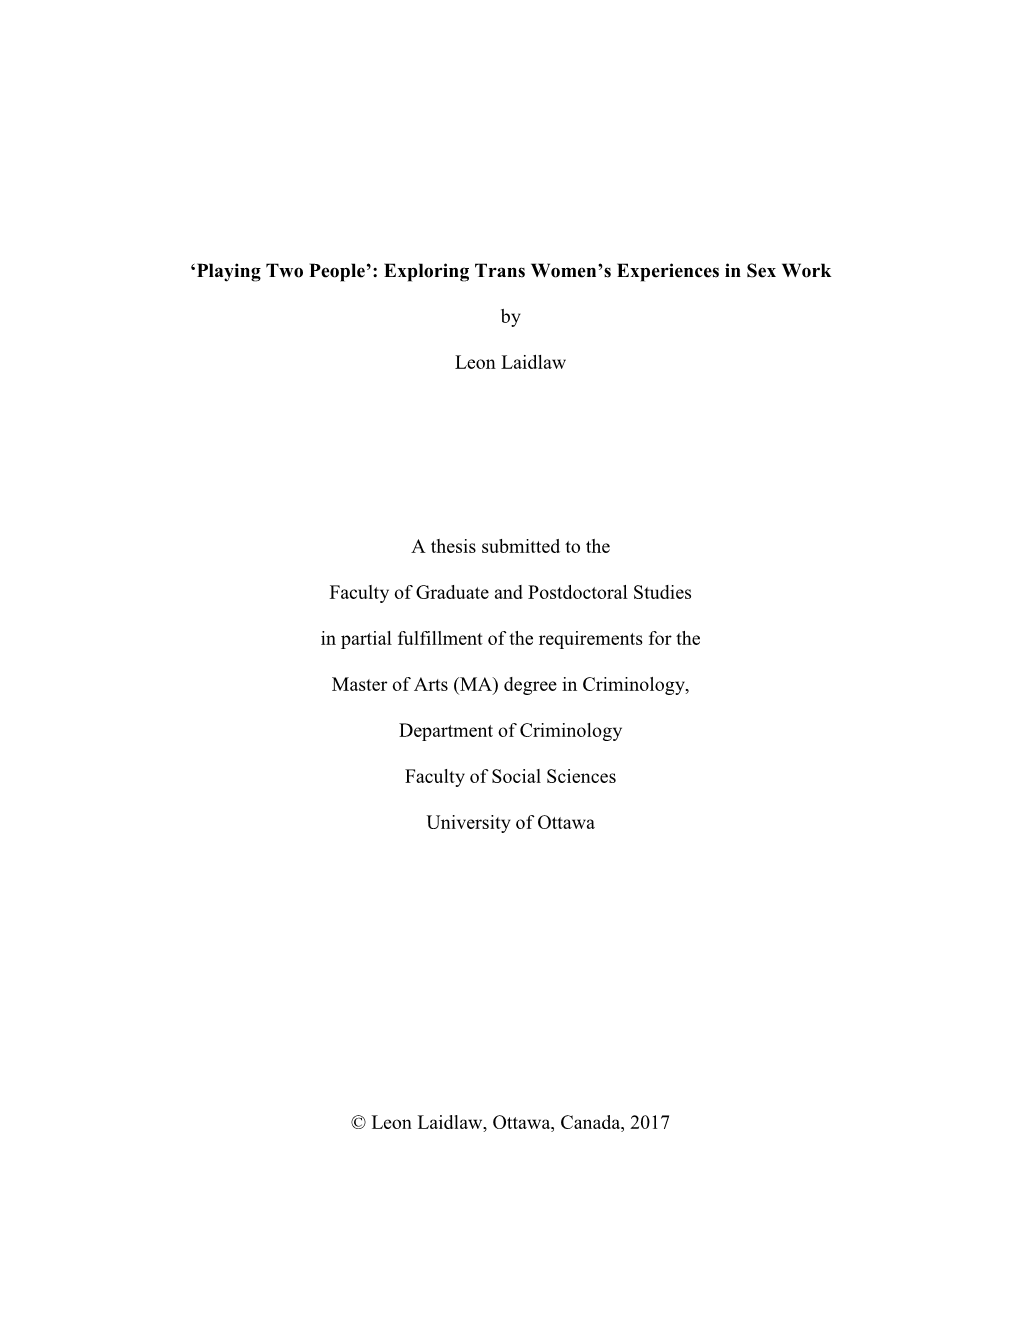 'Playing Two People': Exploring Trans Women's Experiences in Sex Work by Leon Laidlaw a Thesis Submitted to the Faculty Of